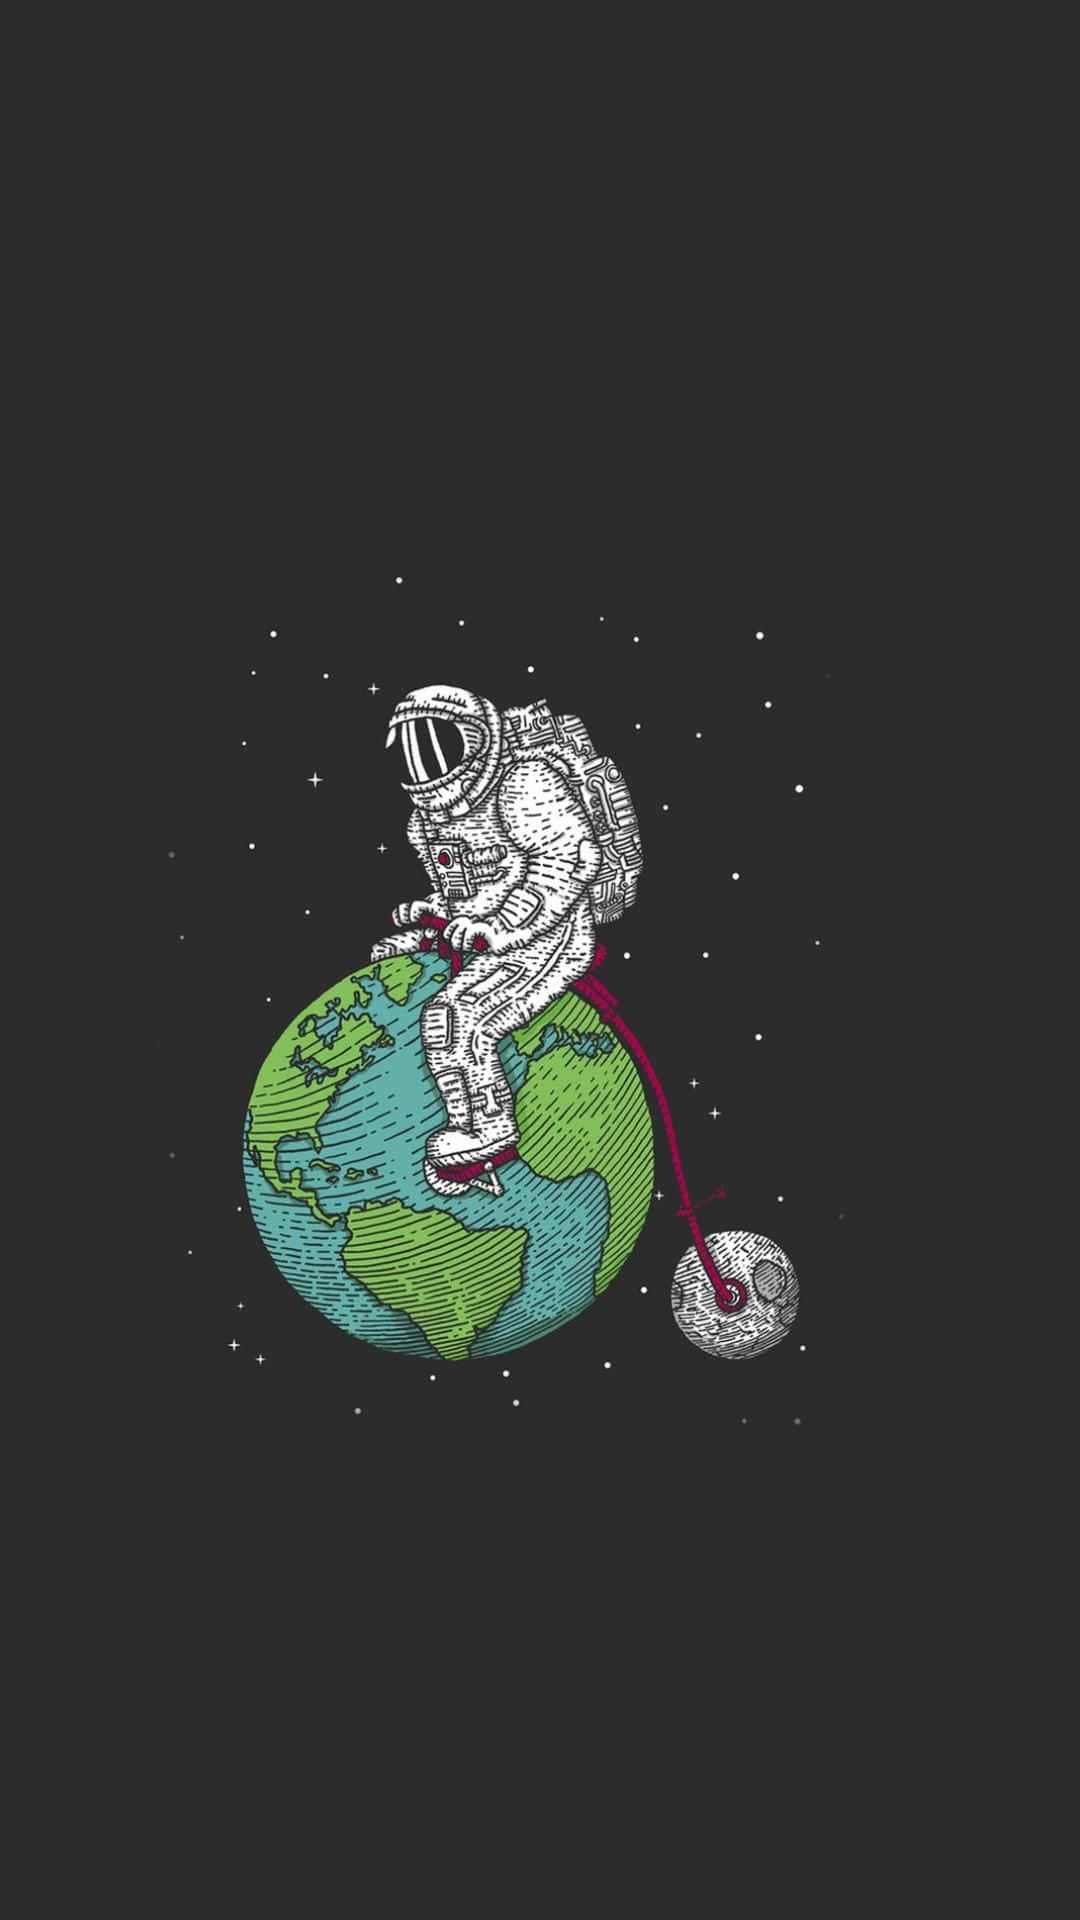 Astronaut Wallpapers HD Astronaut Backgrounds Free Images Download